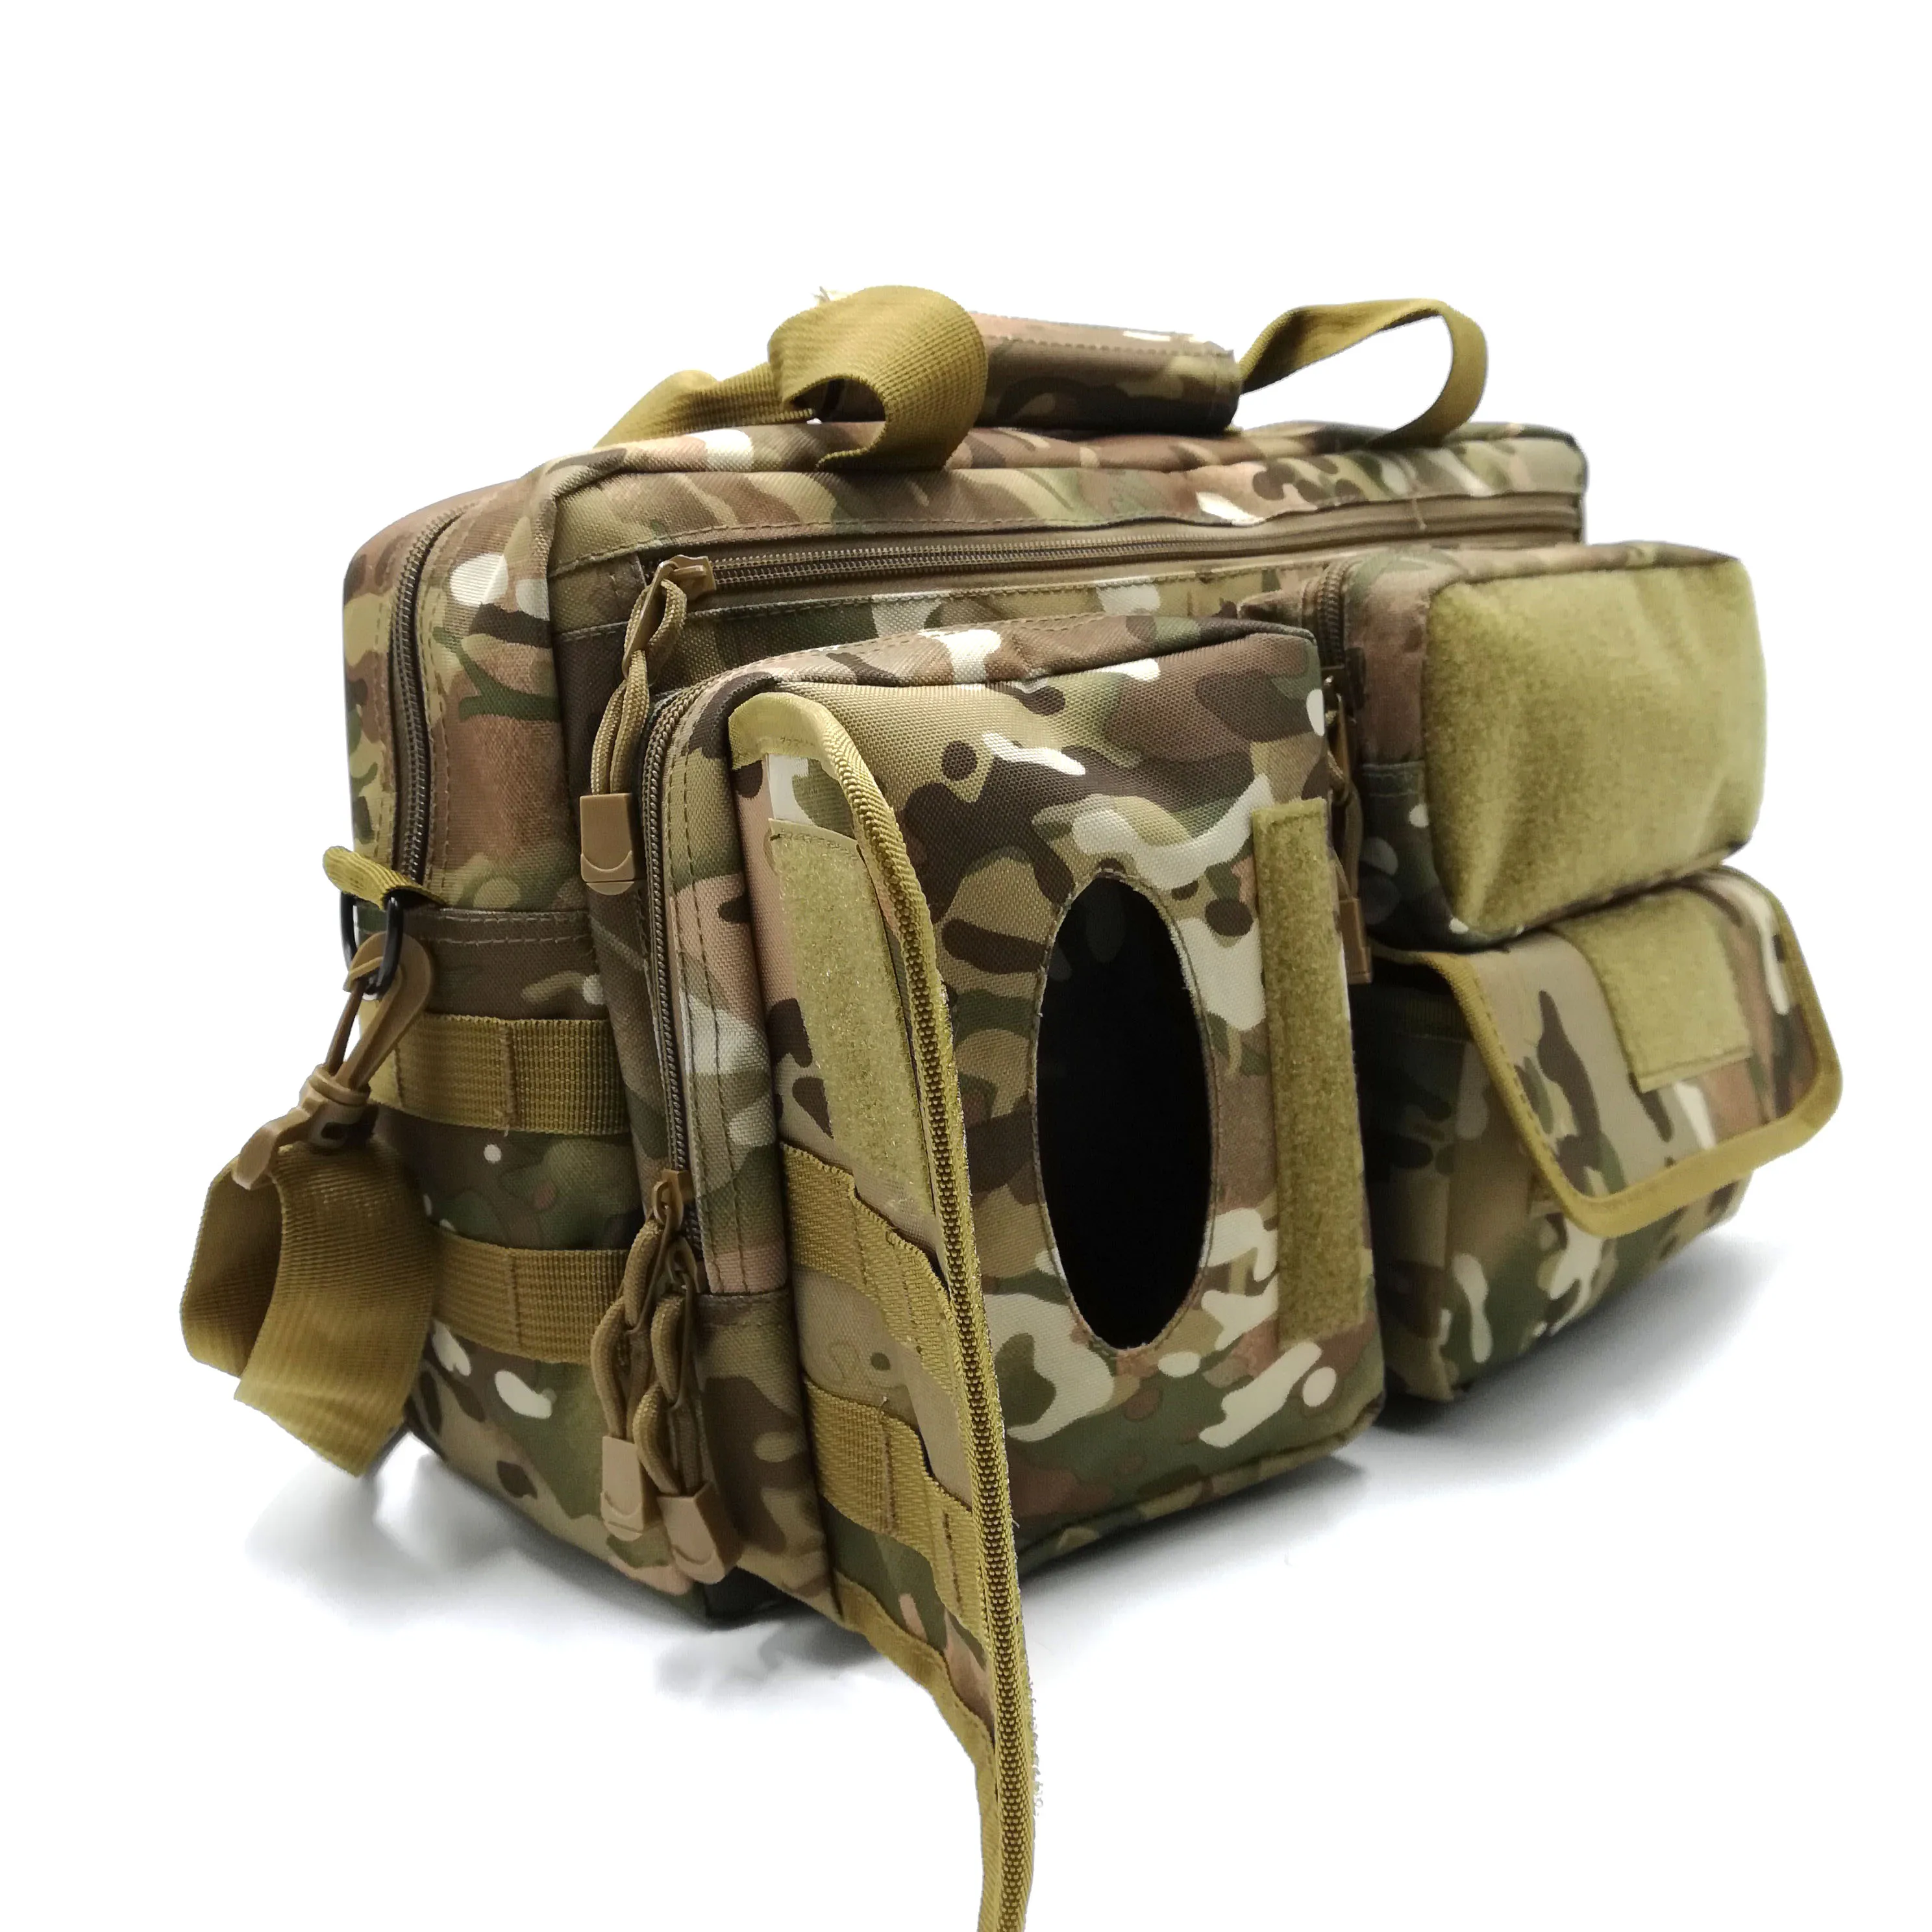 Manly Diaper Bags